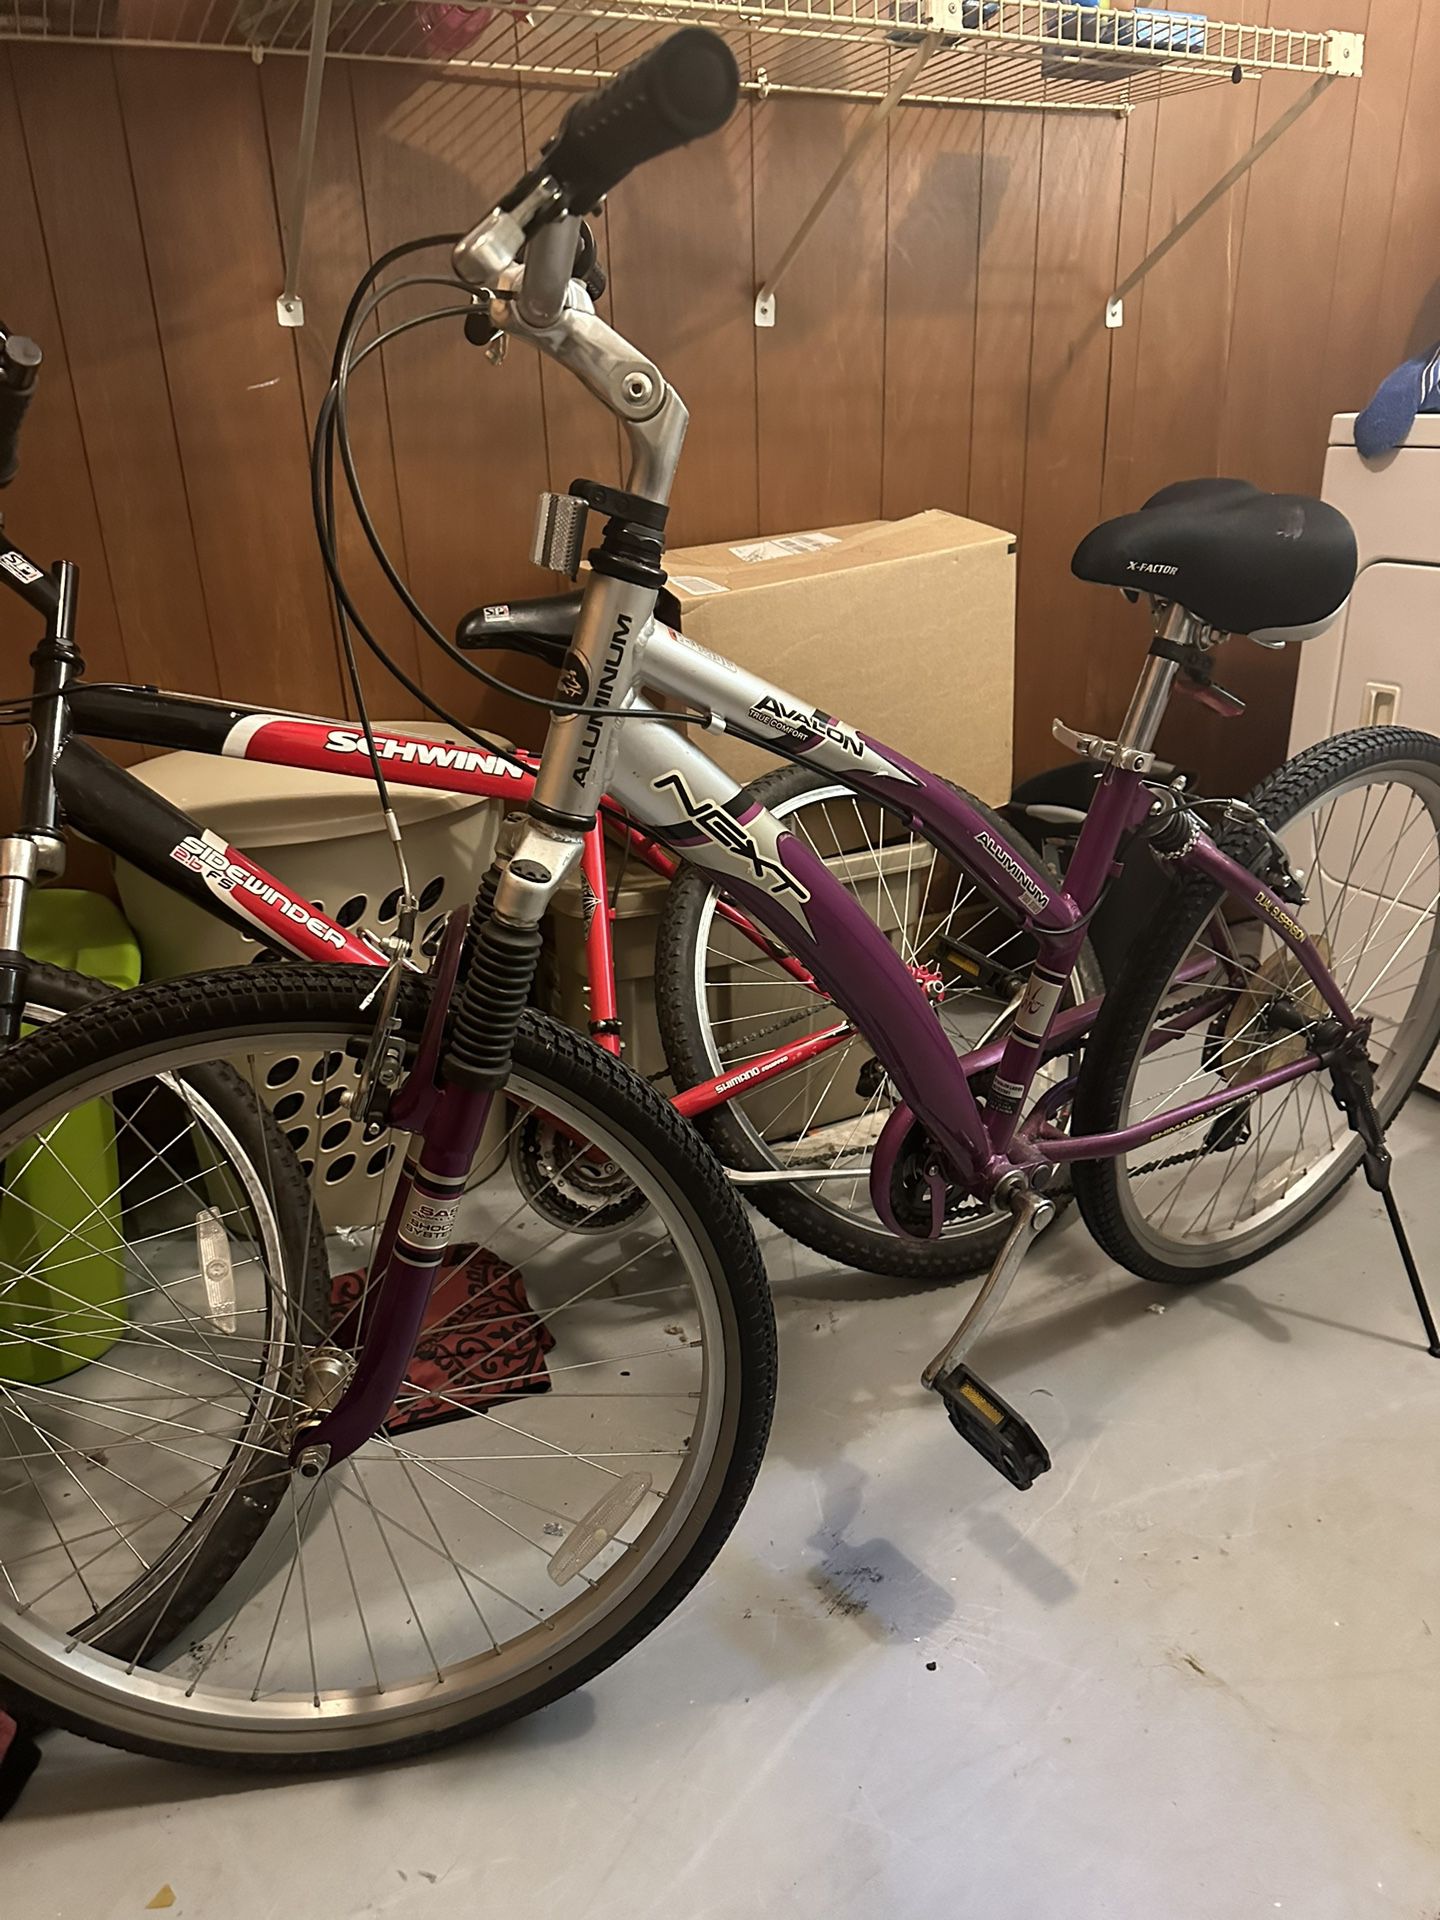 Two Mountain Bike For Sale He Is In Hers In Good Condition Condition Being Kept Inside No Rust